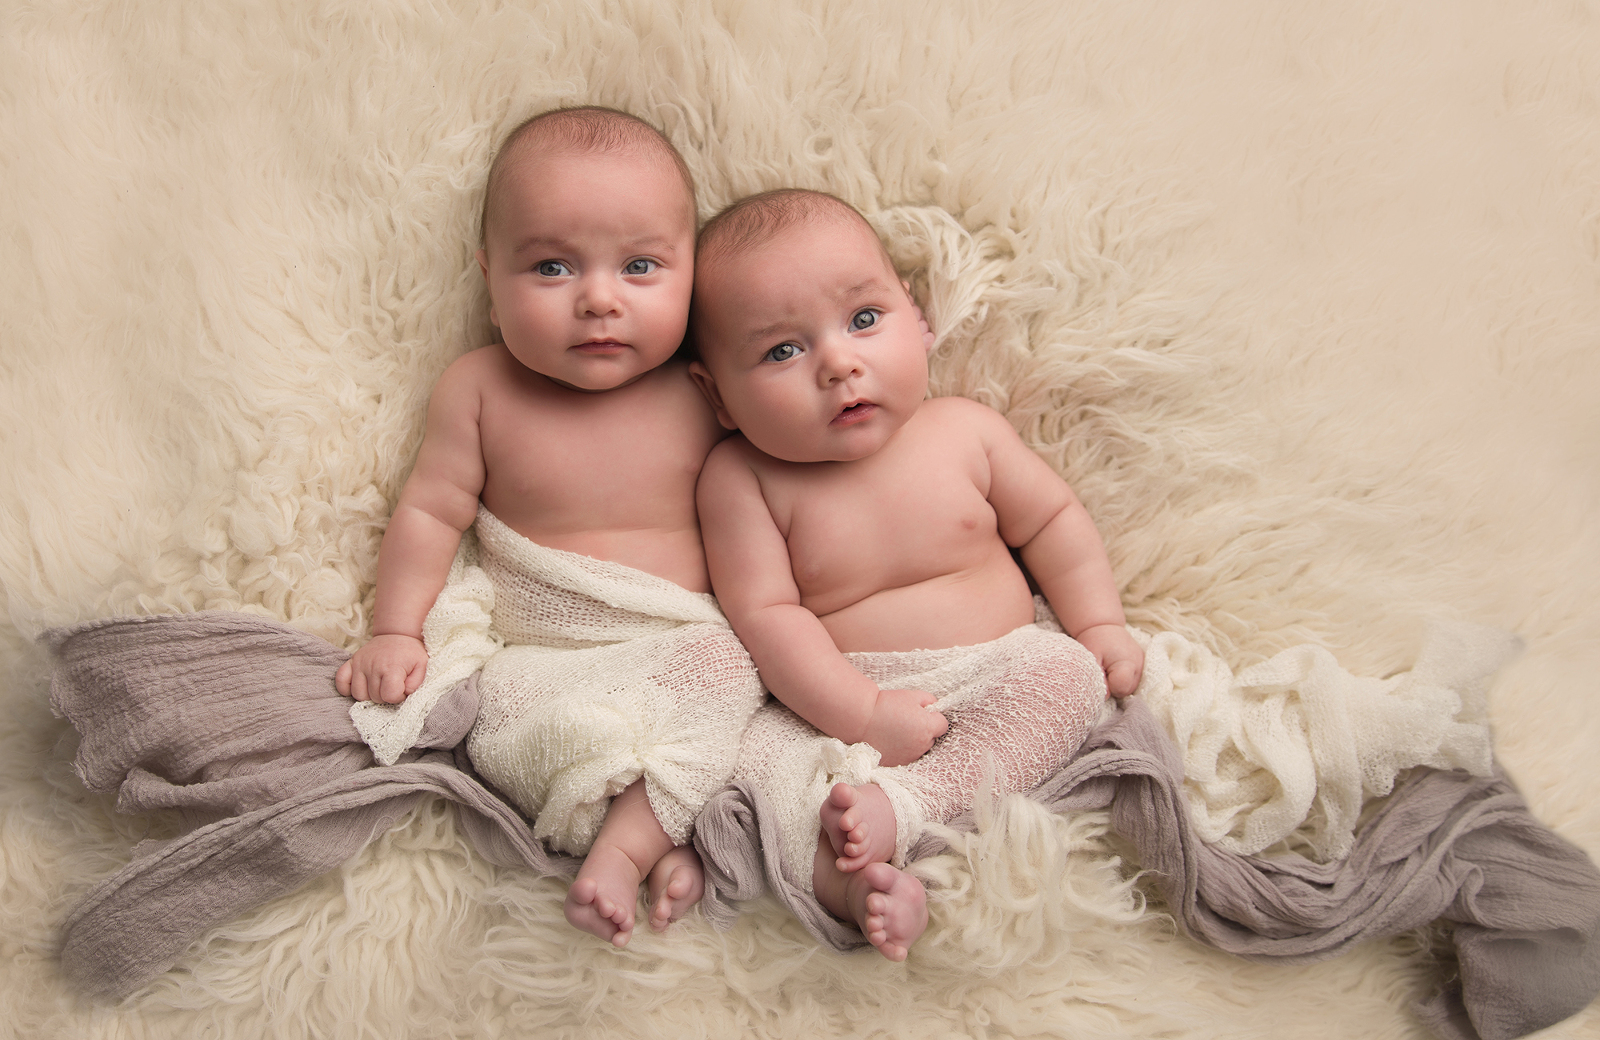 Studio baby twins portrait session with a fluffy light background, the four-month-old twins lying together against one another, partially covered with blankets. Image by Helga Himer Photography, Sudbury, Ontario.